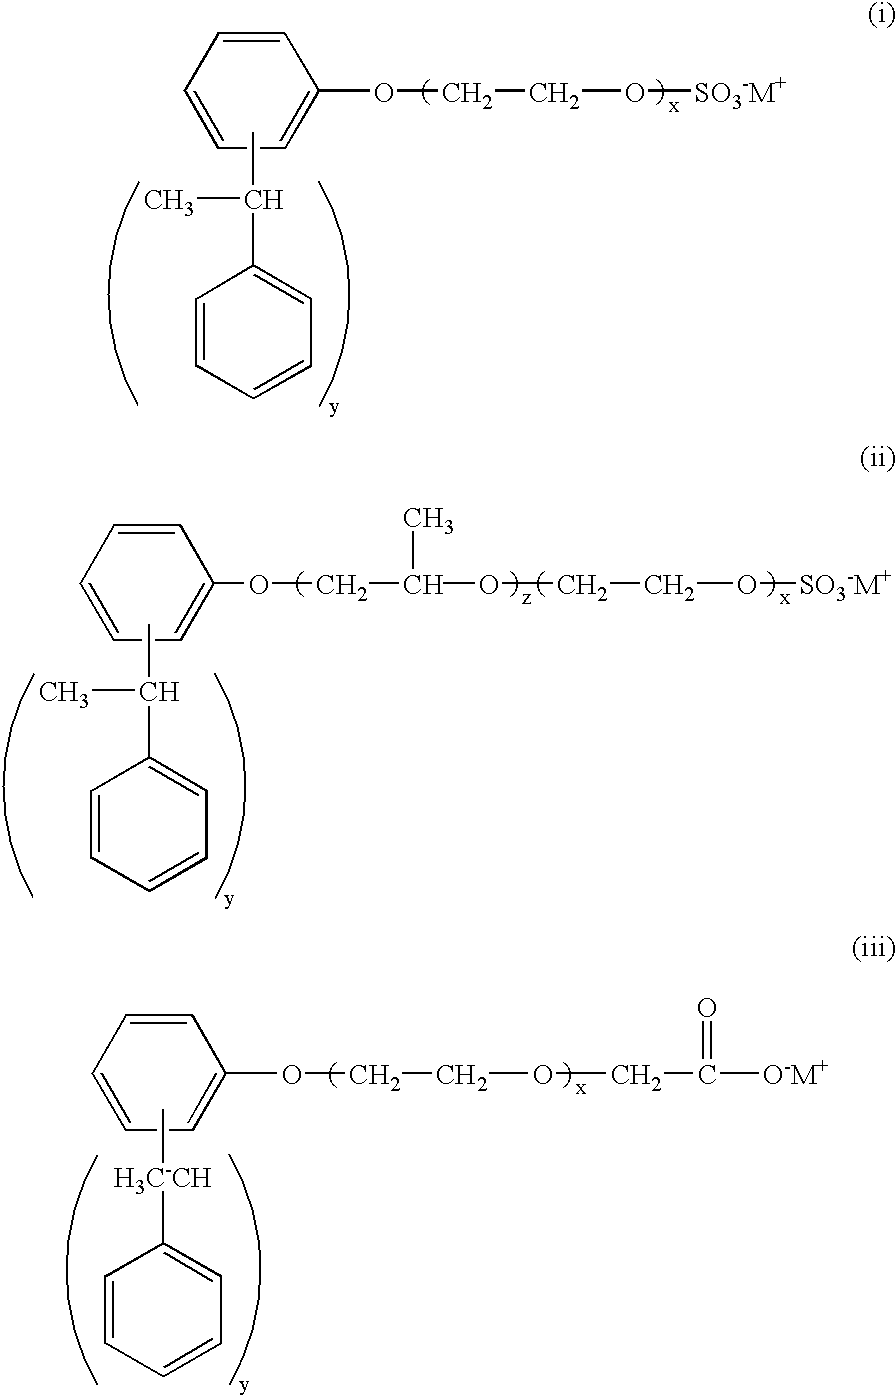 Pigment dispersions containing styrenated and sulfated phenol alkoxylates